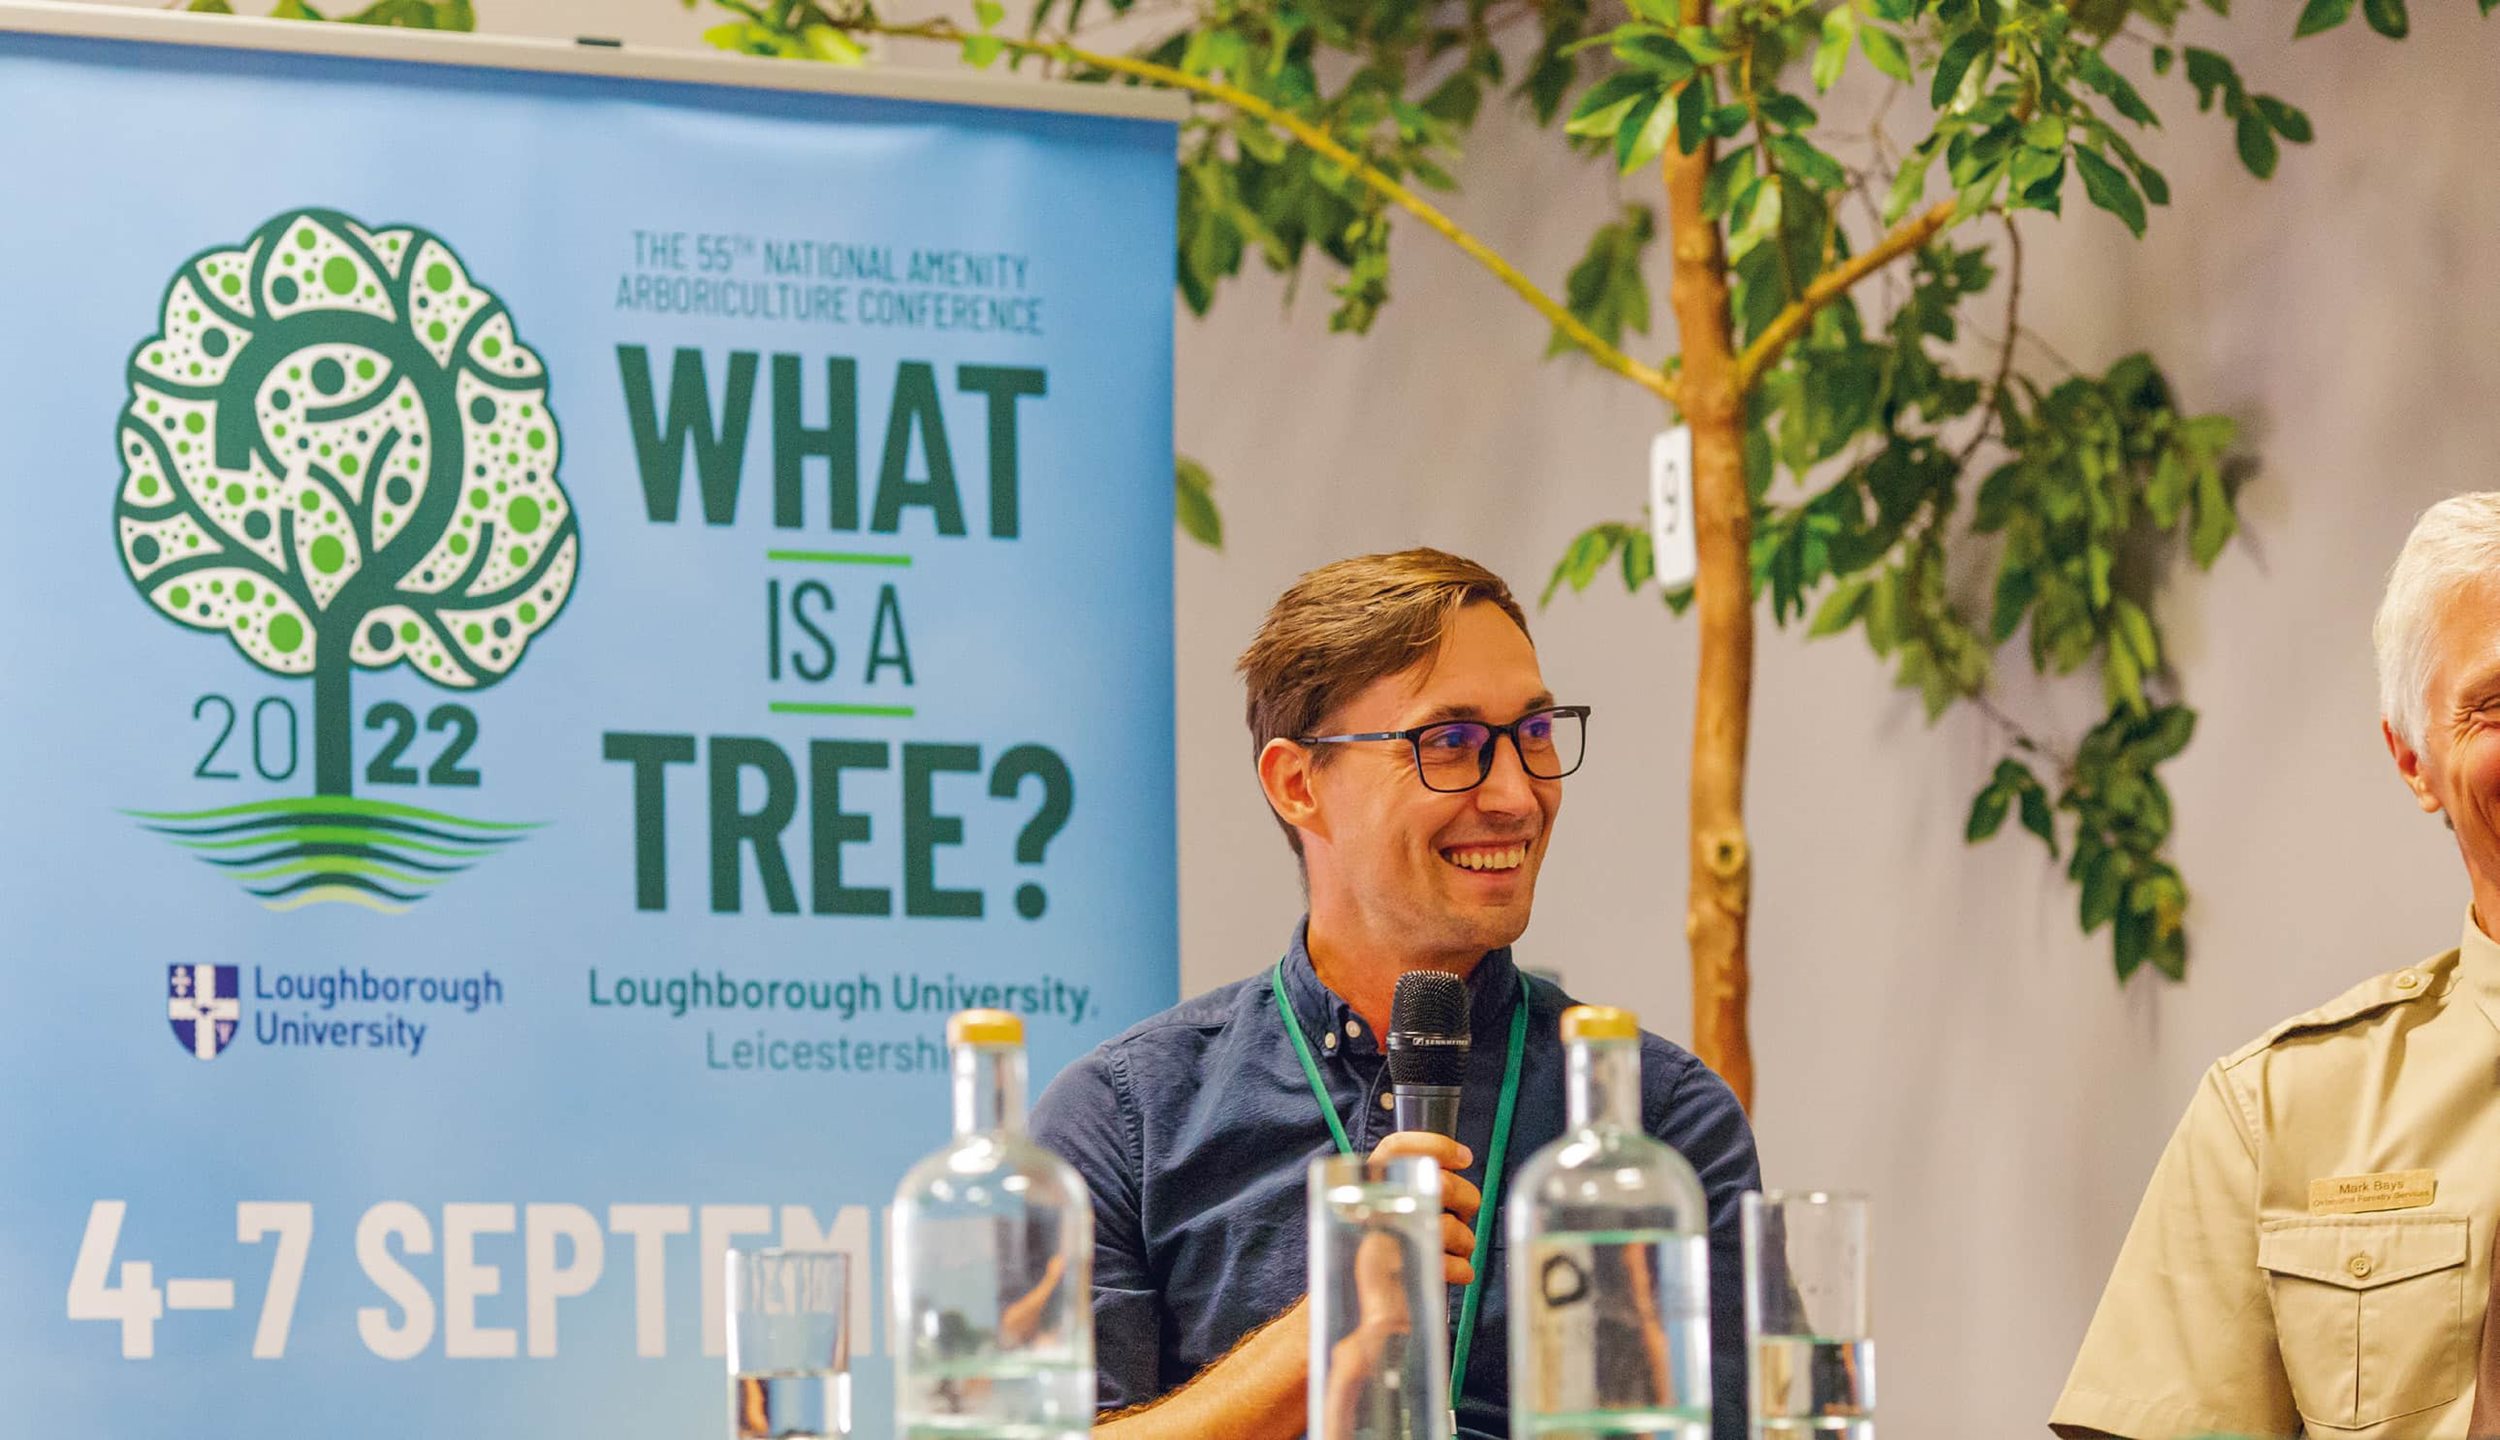 Kamil Witkos-Gnach with Mark bays answers questions at the What is a Tree? conference